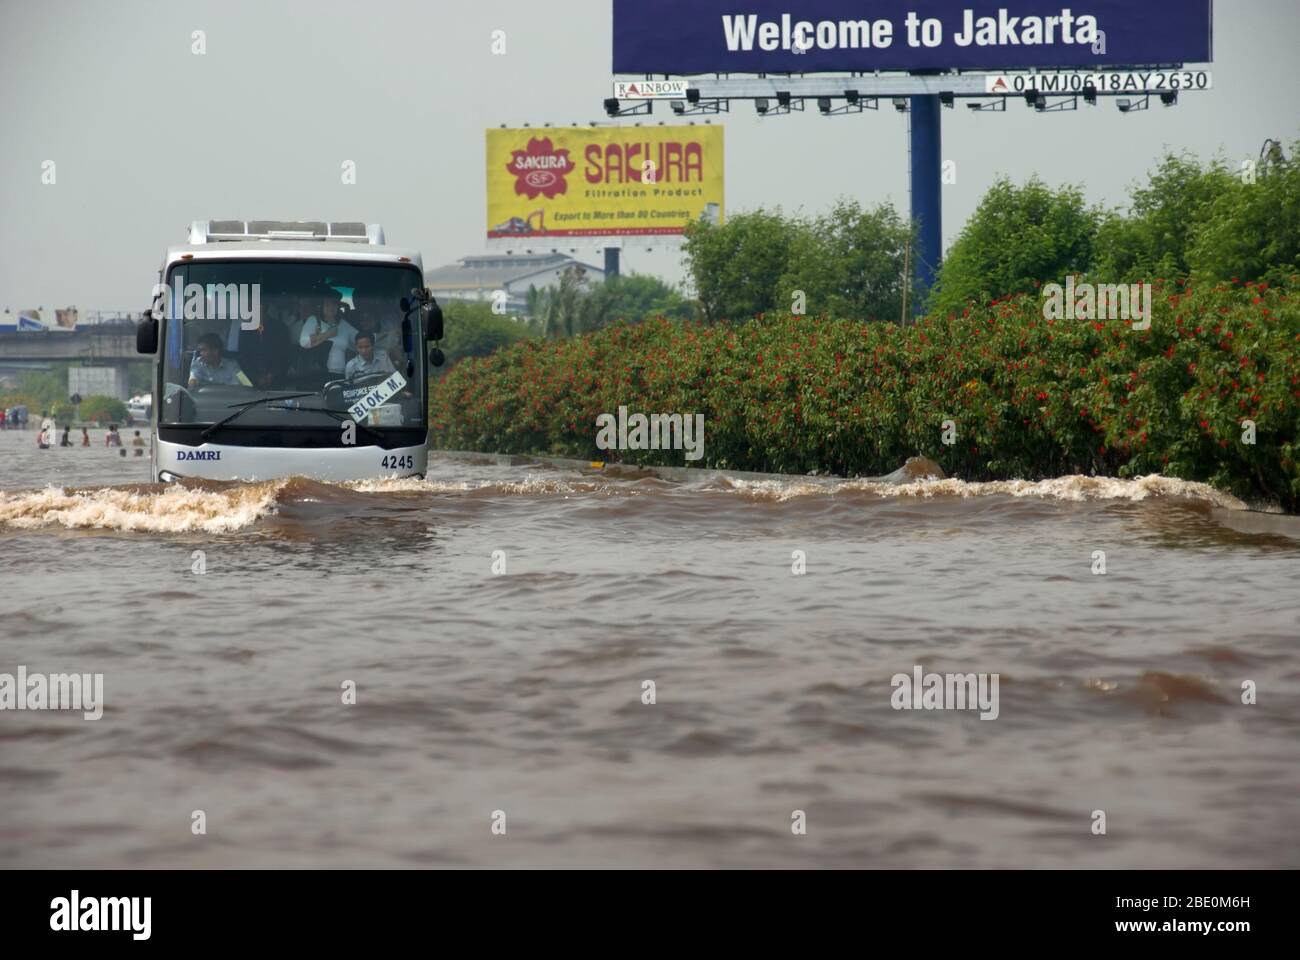 Jakarta Airport shuttle bus passing through flooded toll road in 2008. Archival Image. Photo: Reynold Sumayku Stock Photo